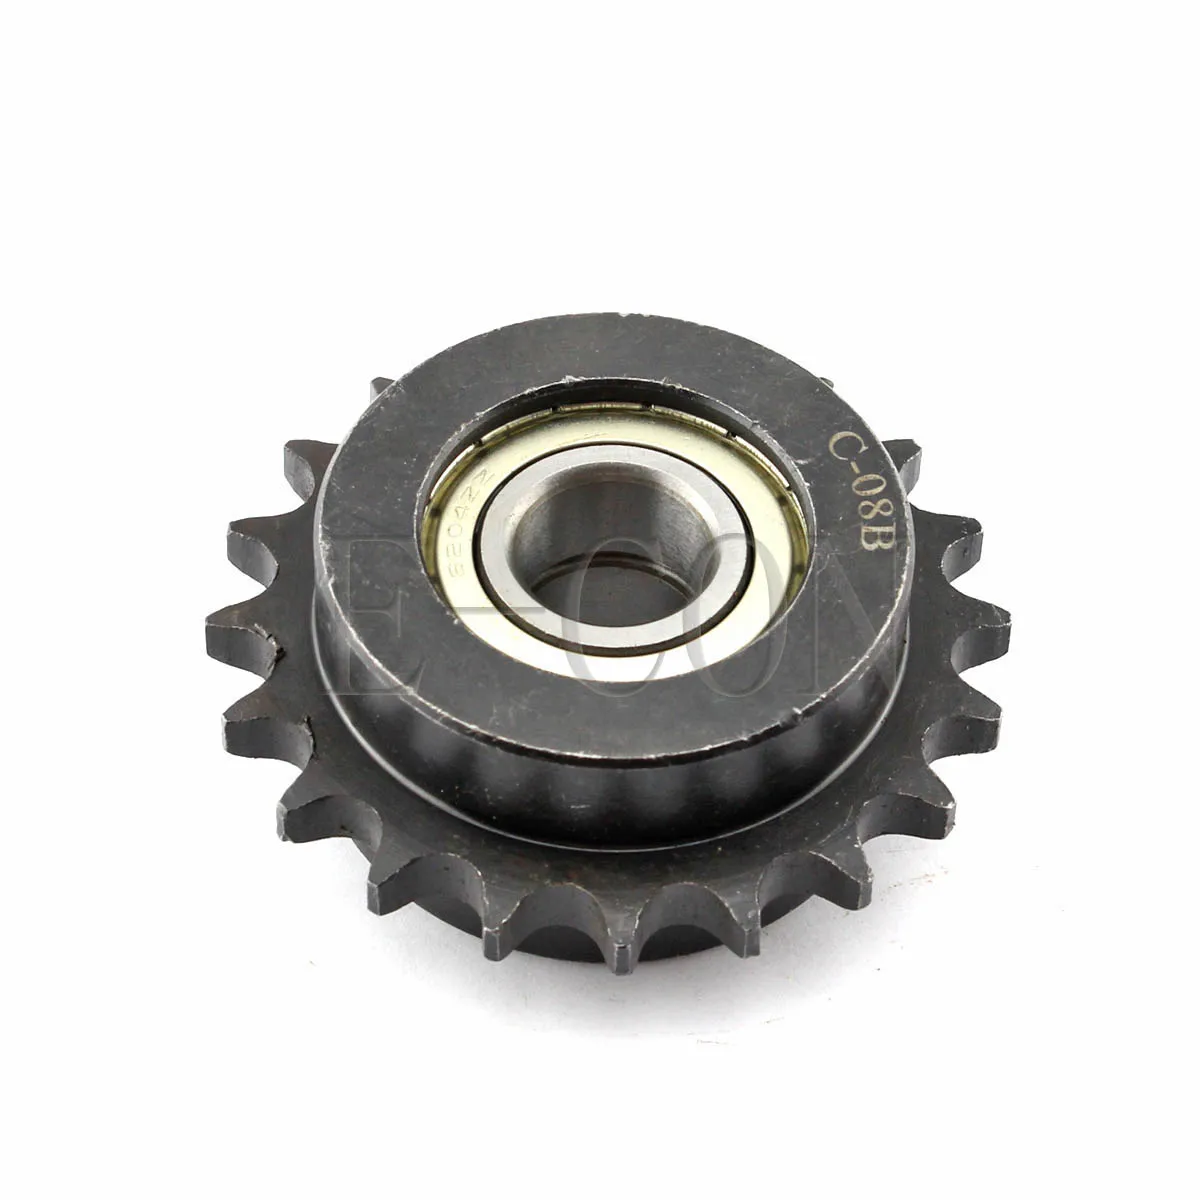 

1 PCS 08B Idler Sprocket 21 Teeth Bore 20mm Double Bearings Metal for Timing Gear Roller Chain